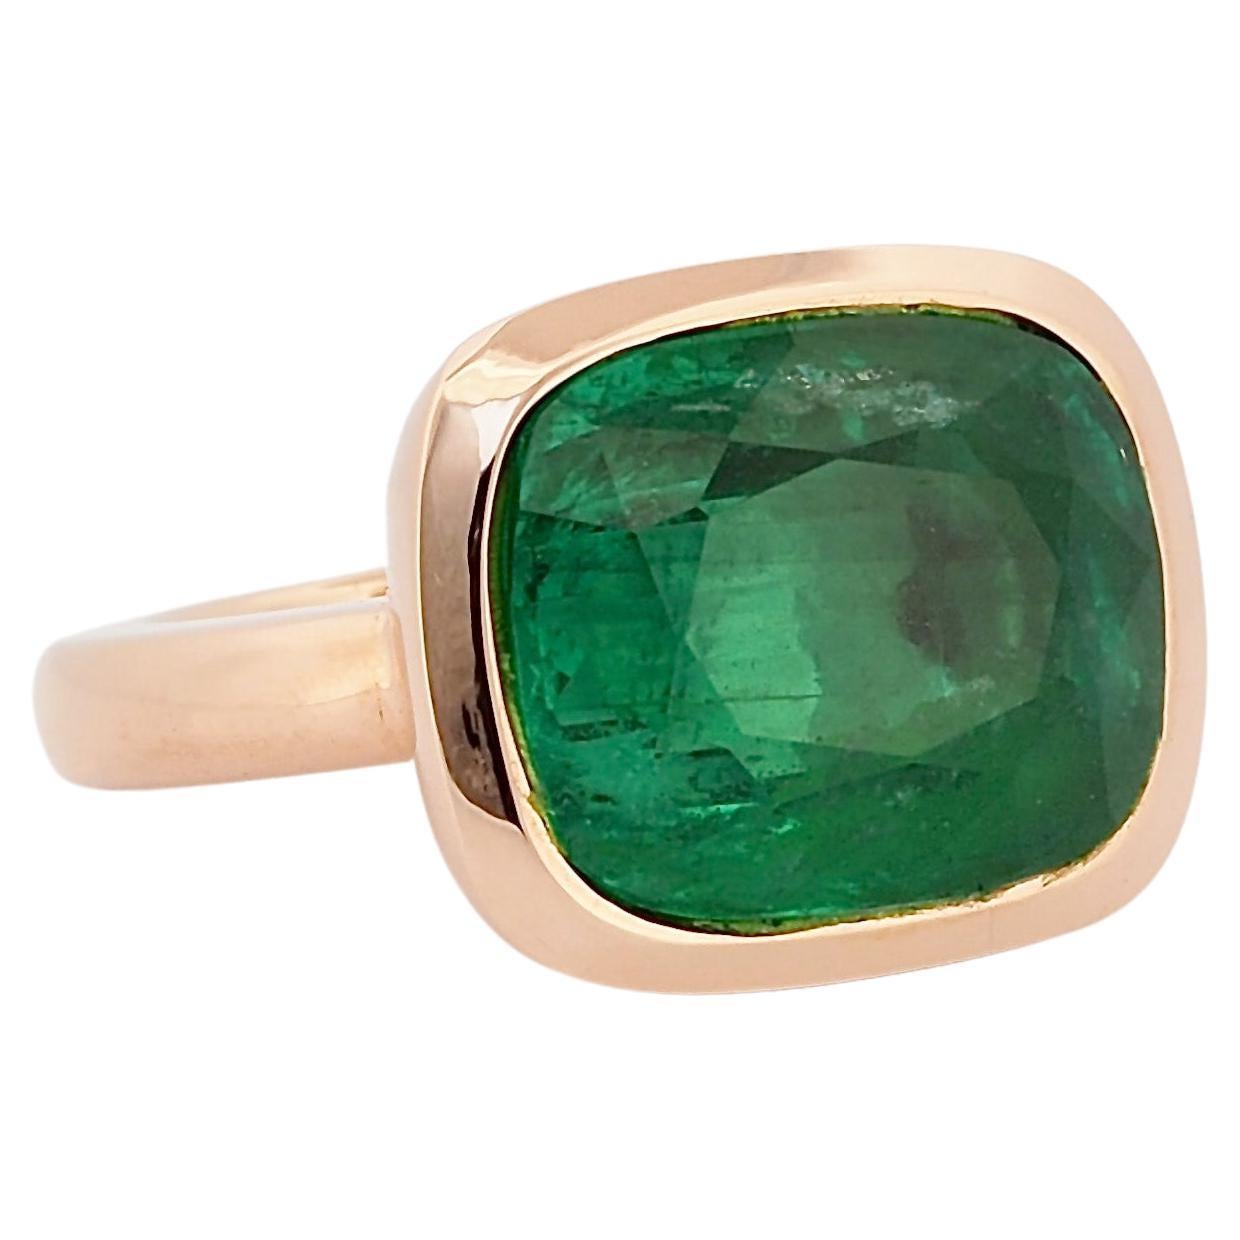 Stunning Emerald Ring, Emerald from Zambia 11.95 ct, with SSEF Certificate Minor Oil.
This one of a kind stone is set in rose gold 750.